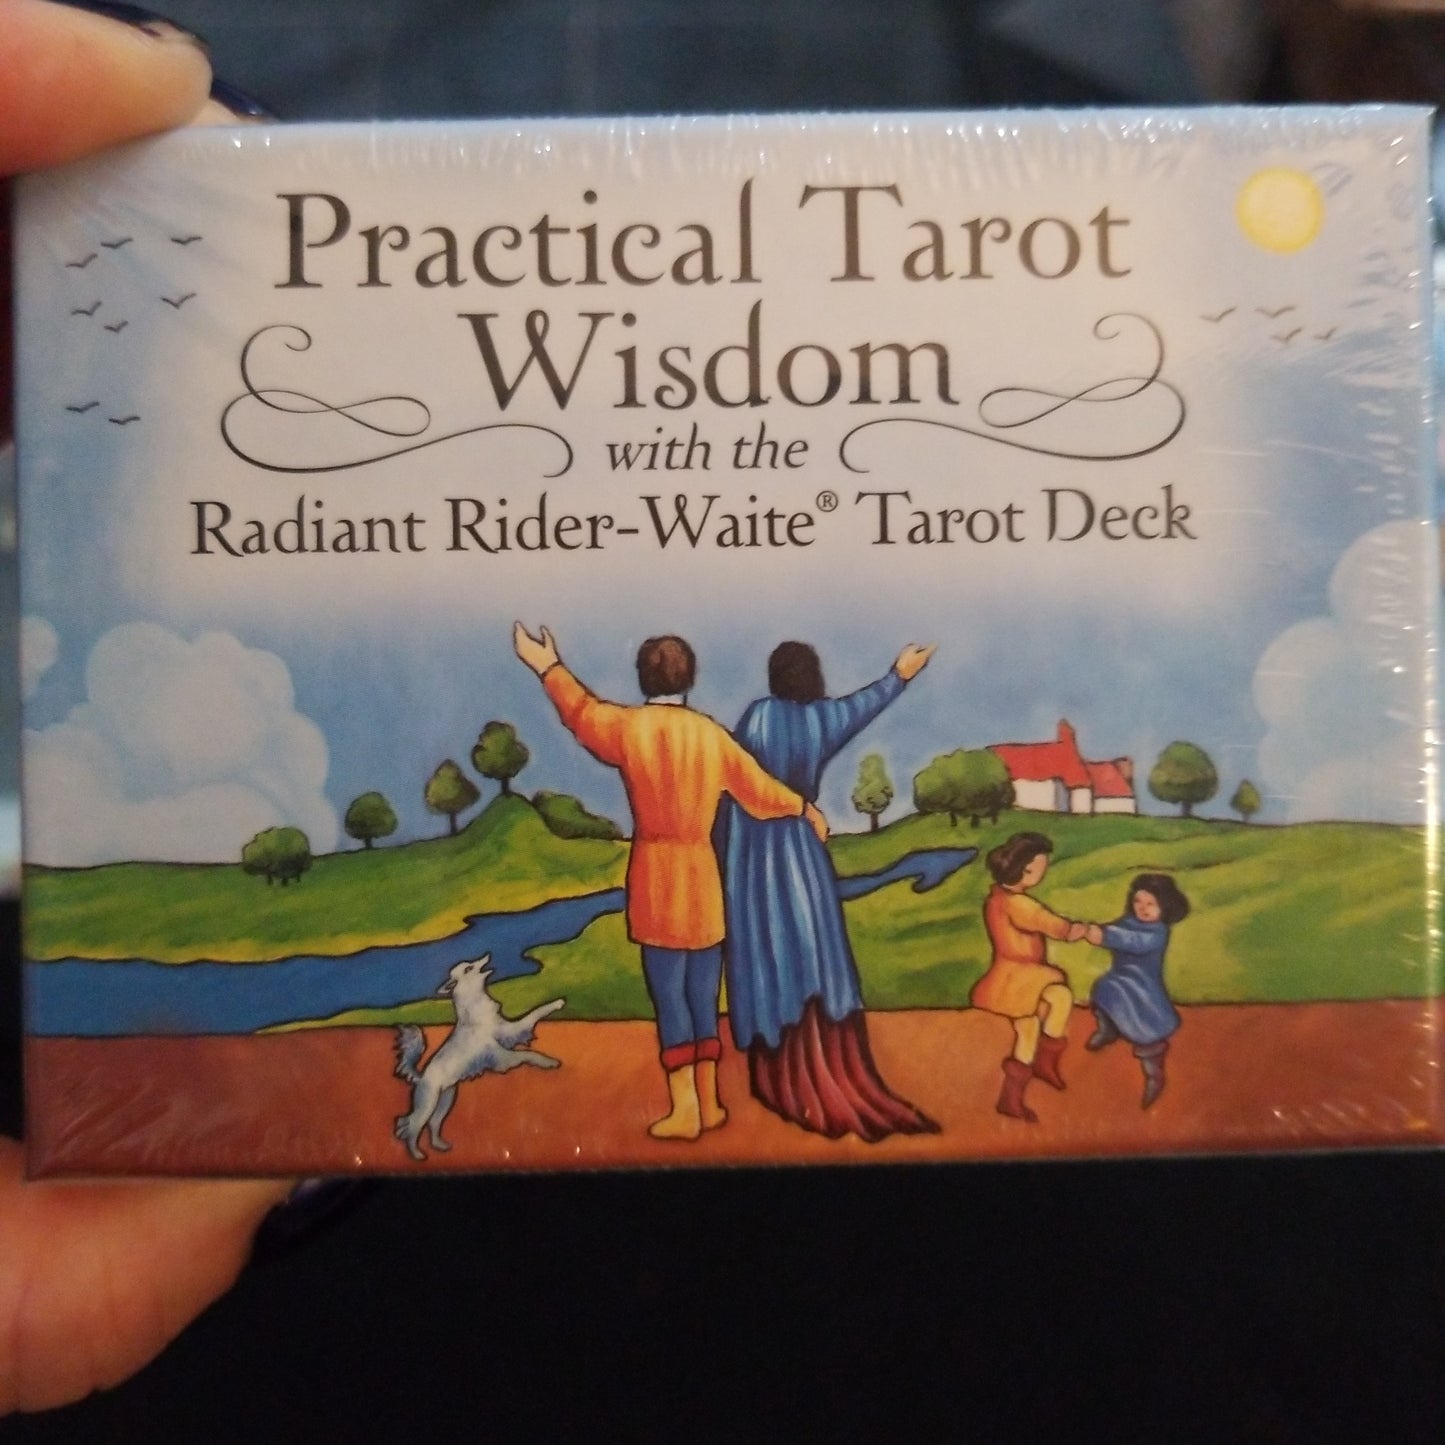 Practical Tarot Wisdom with the Radiant Rider - Waite